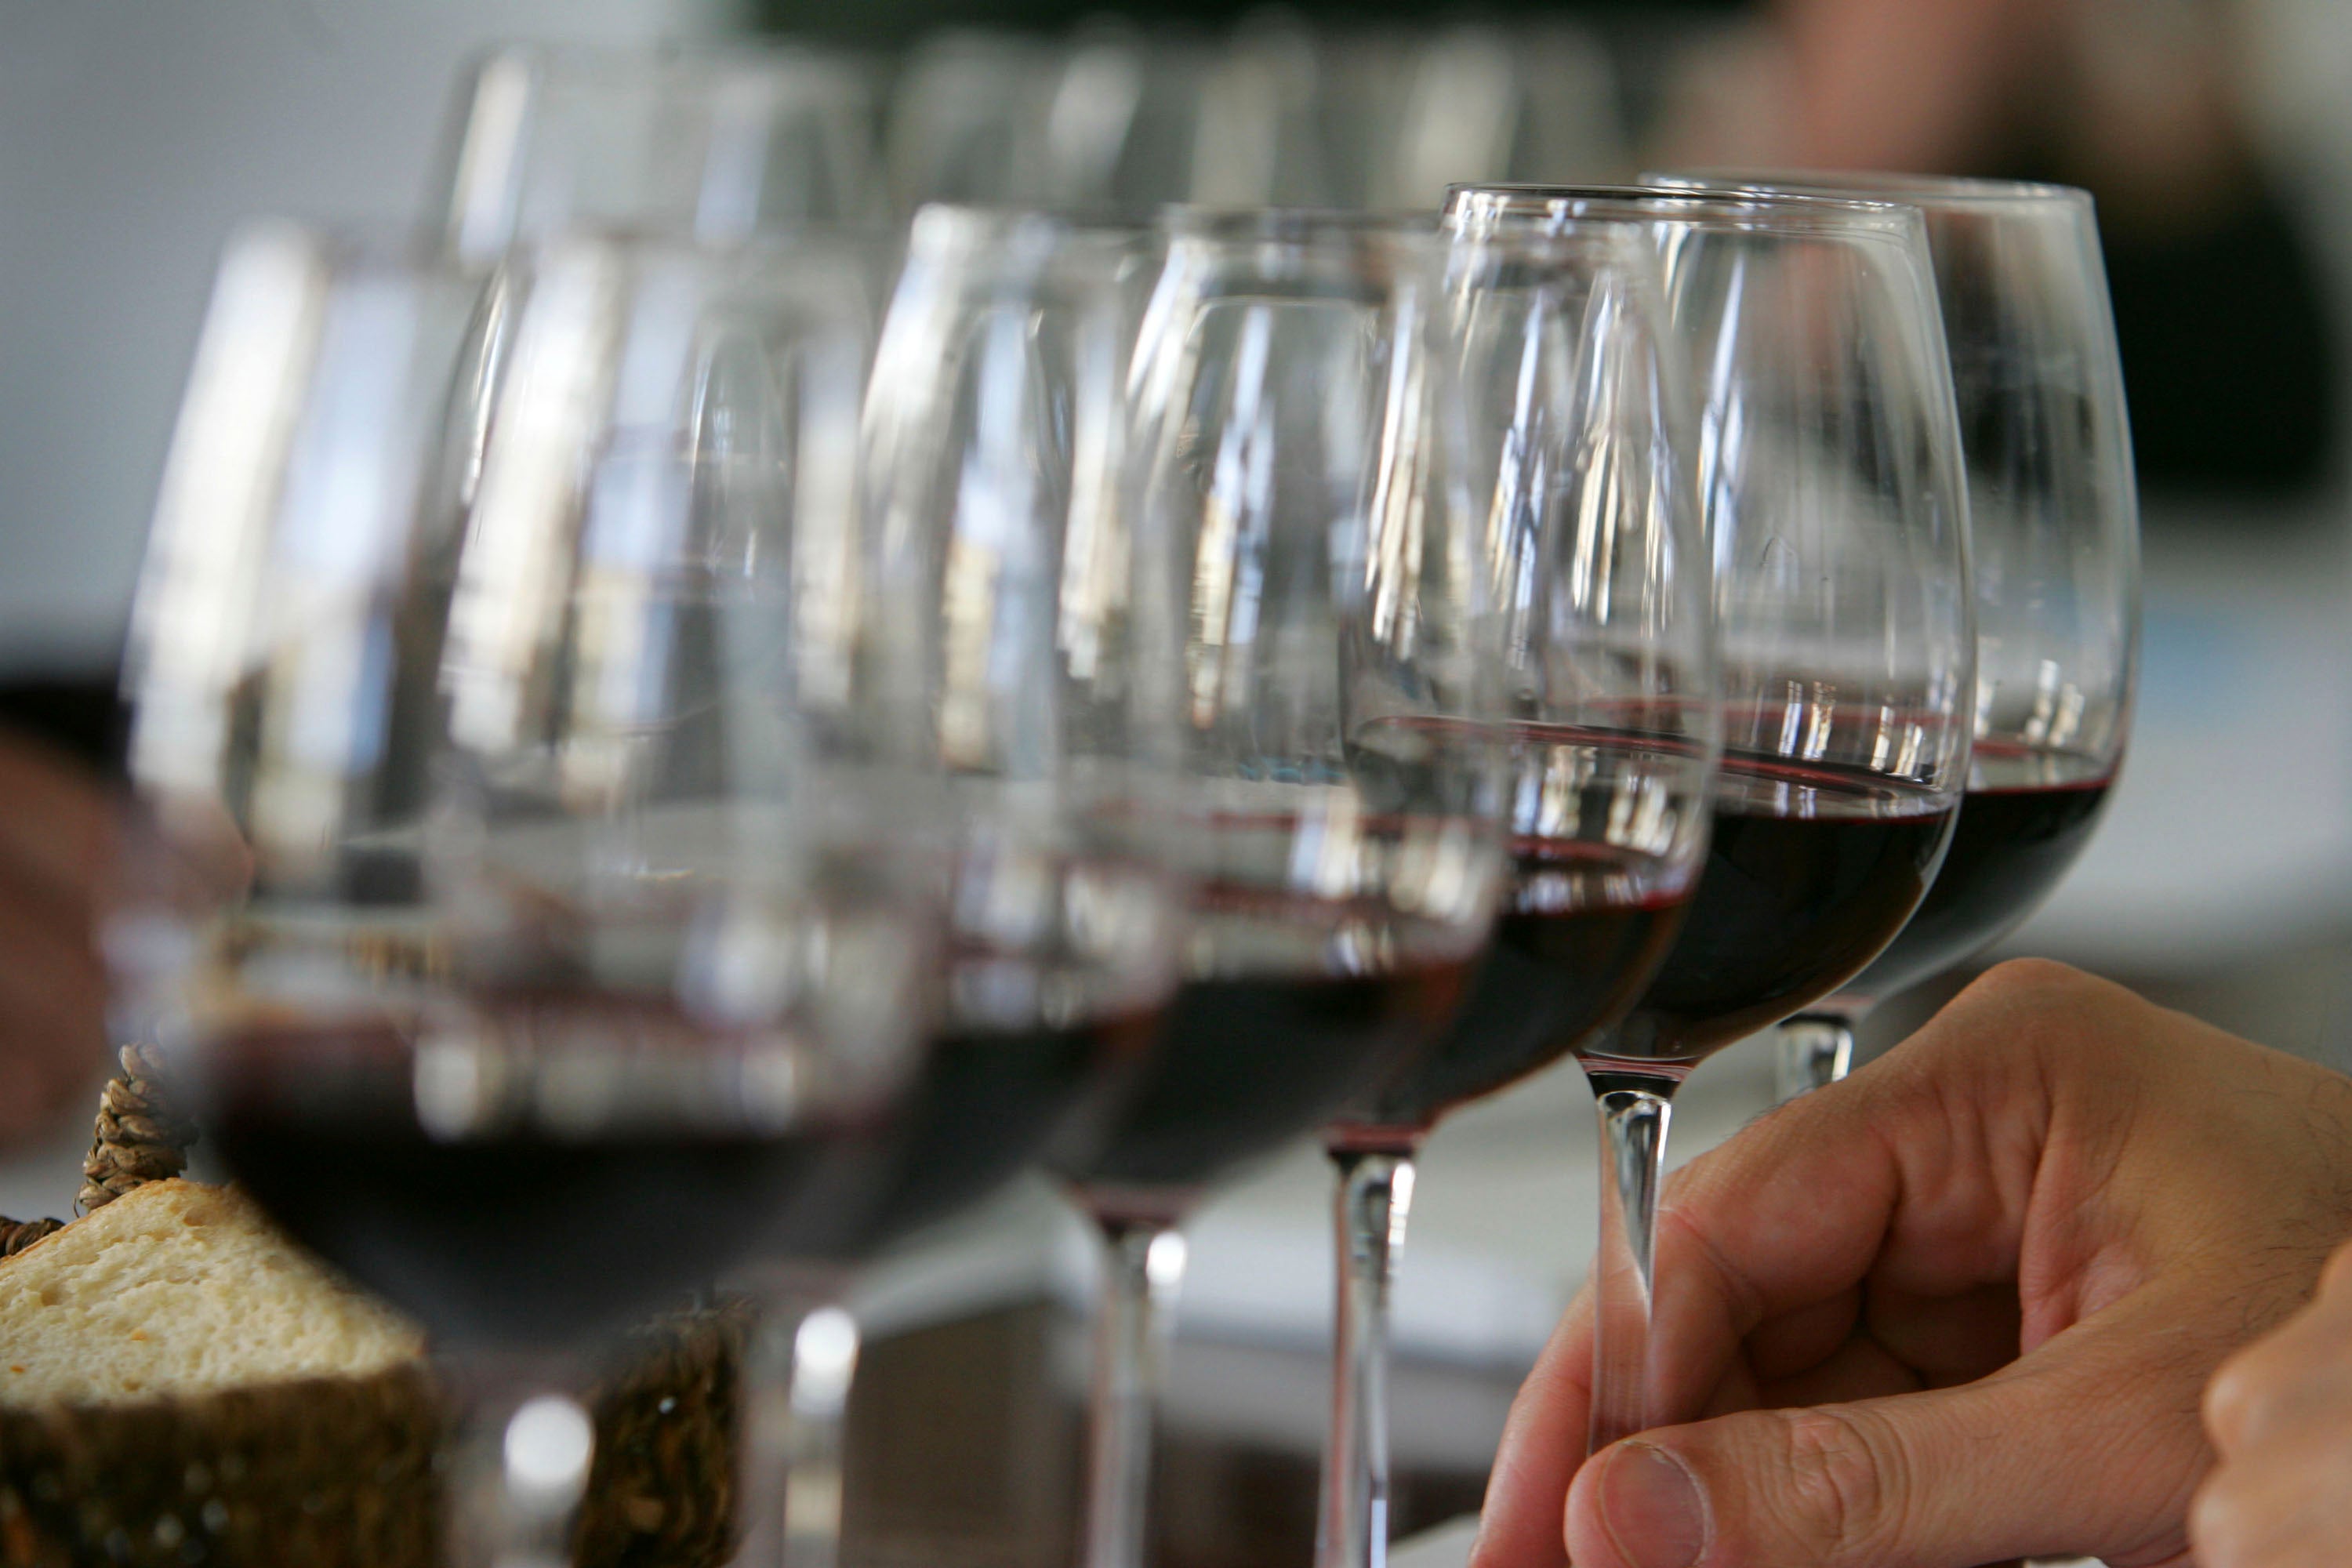 Red wine could help combat acne, researchers say